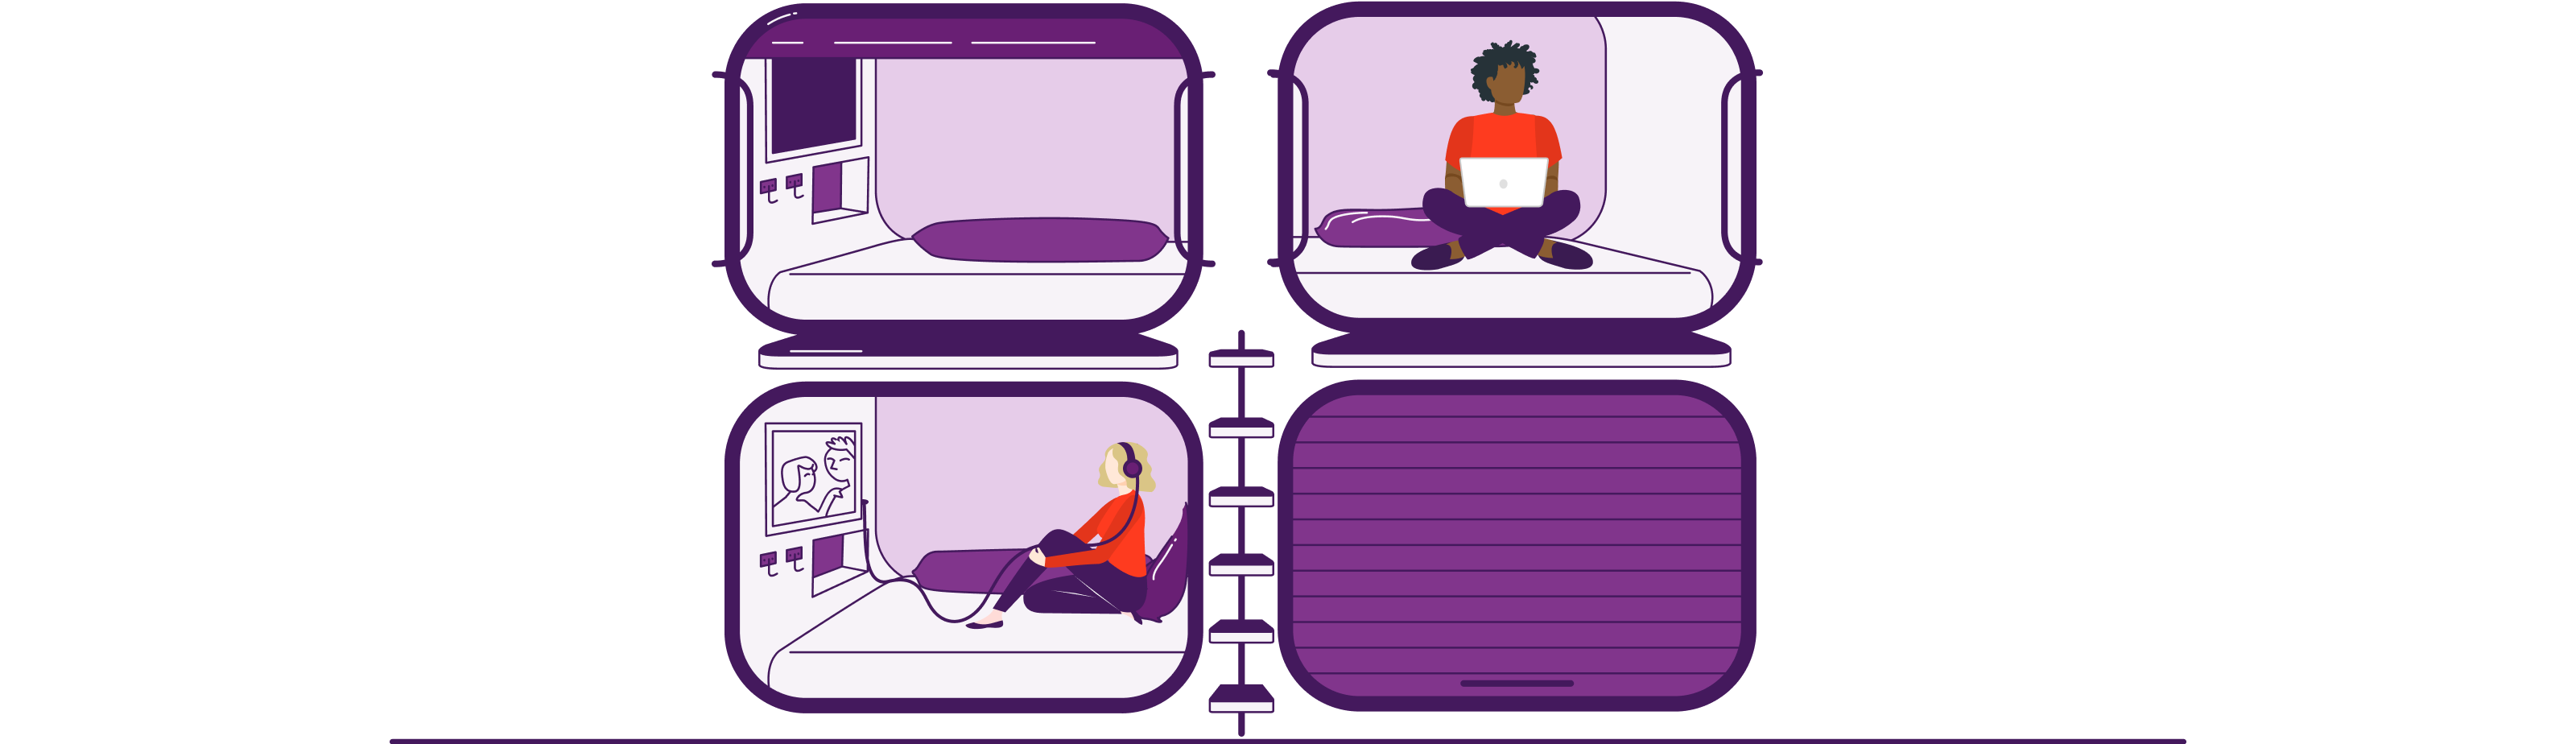 illustration showing employees working, sleeping and playing video games in designated pods. 